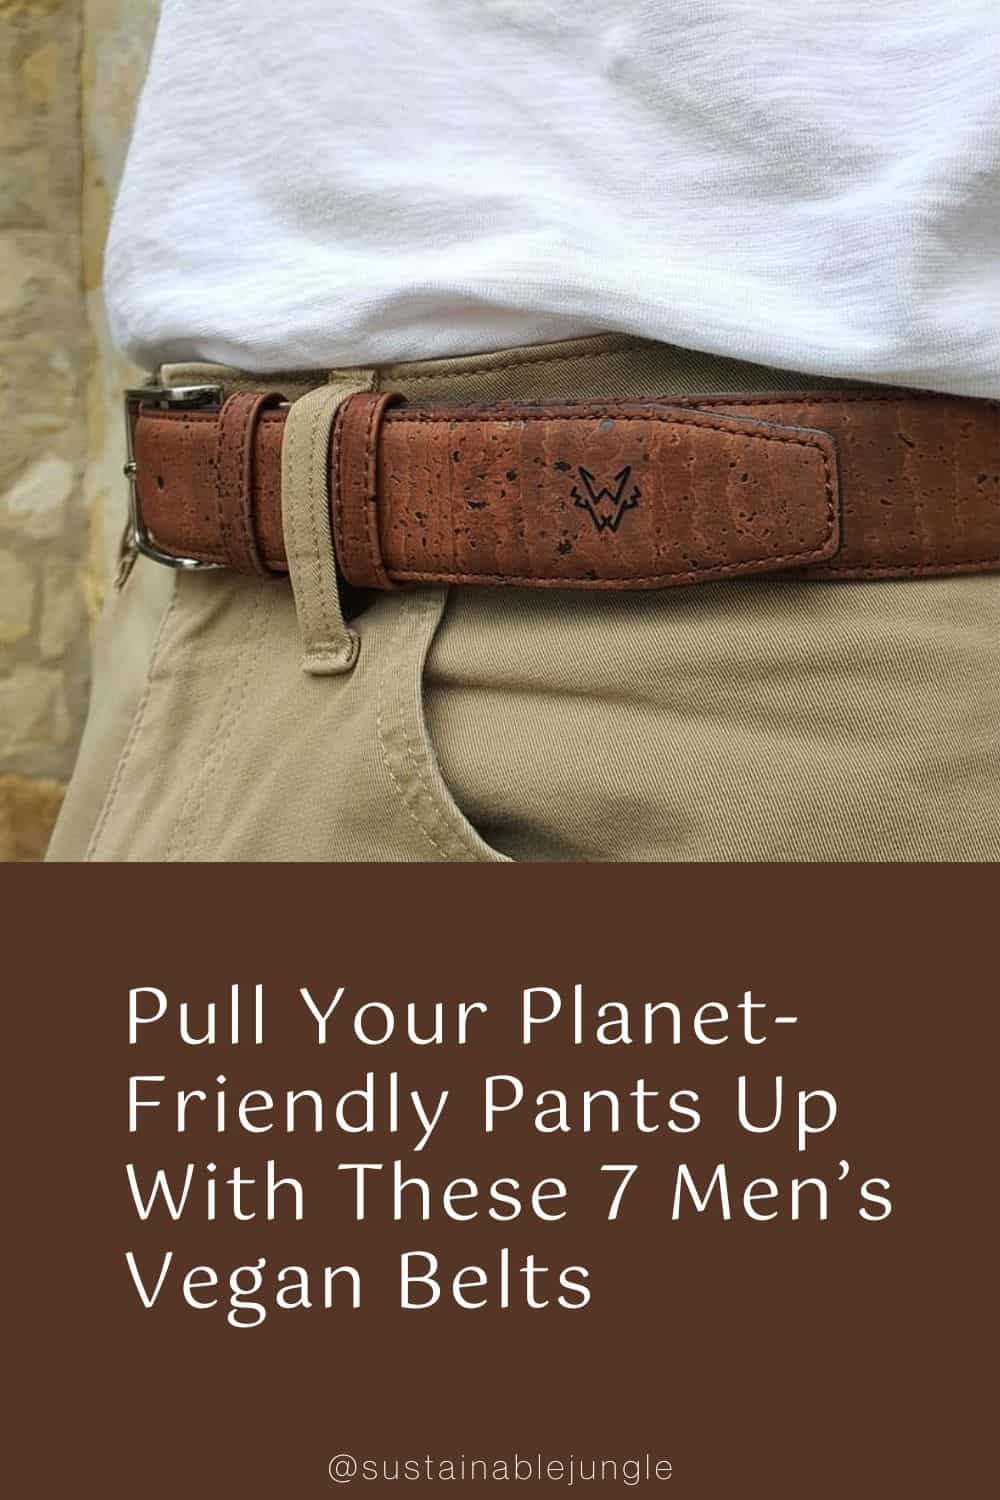 Pull Your Planet-Friendly Pants Up With These 7 Men’s Vegan Belts Image by Watson & Wolf #mensveganbelts #mensveganleatherbelts #veganmensbelts #veganbeltsmens #veganbeltsformen #bestveganbeltsformen #sustainablejungle